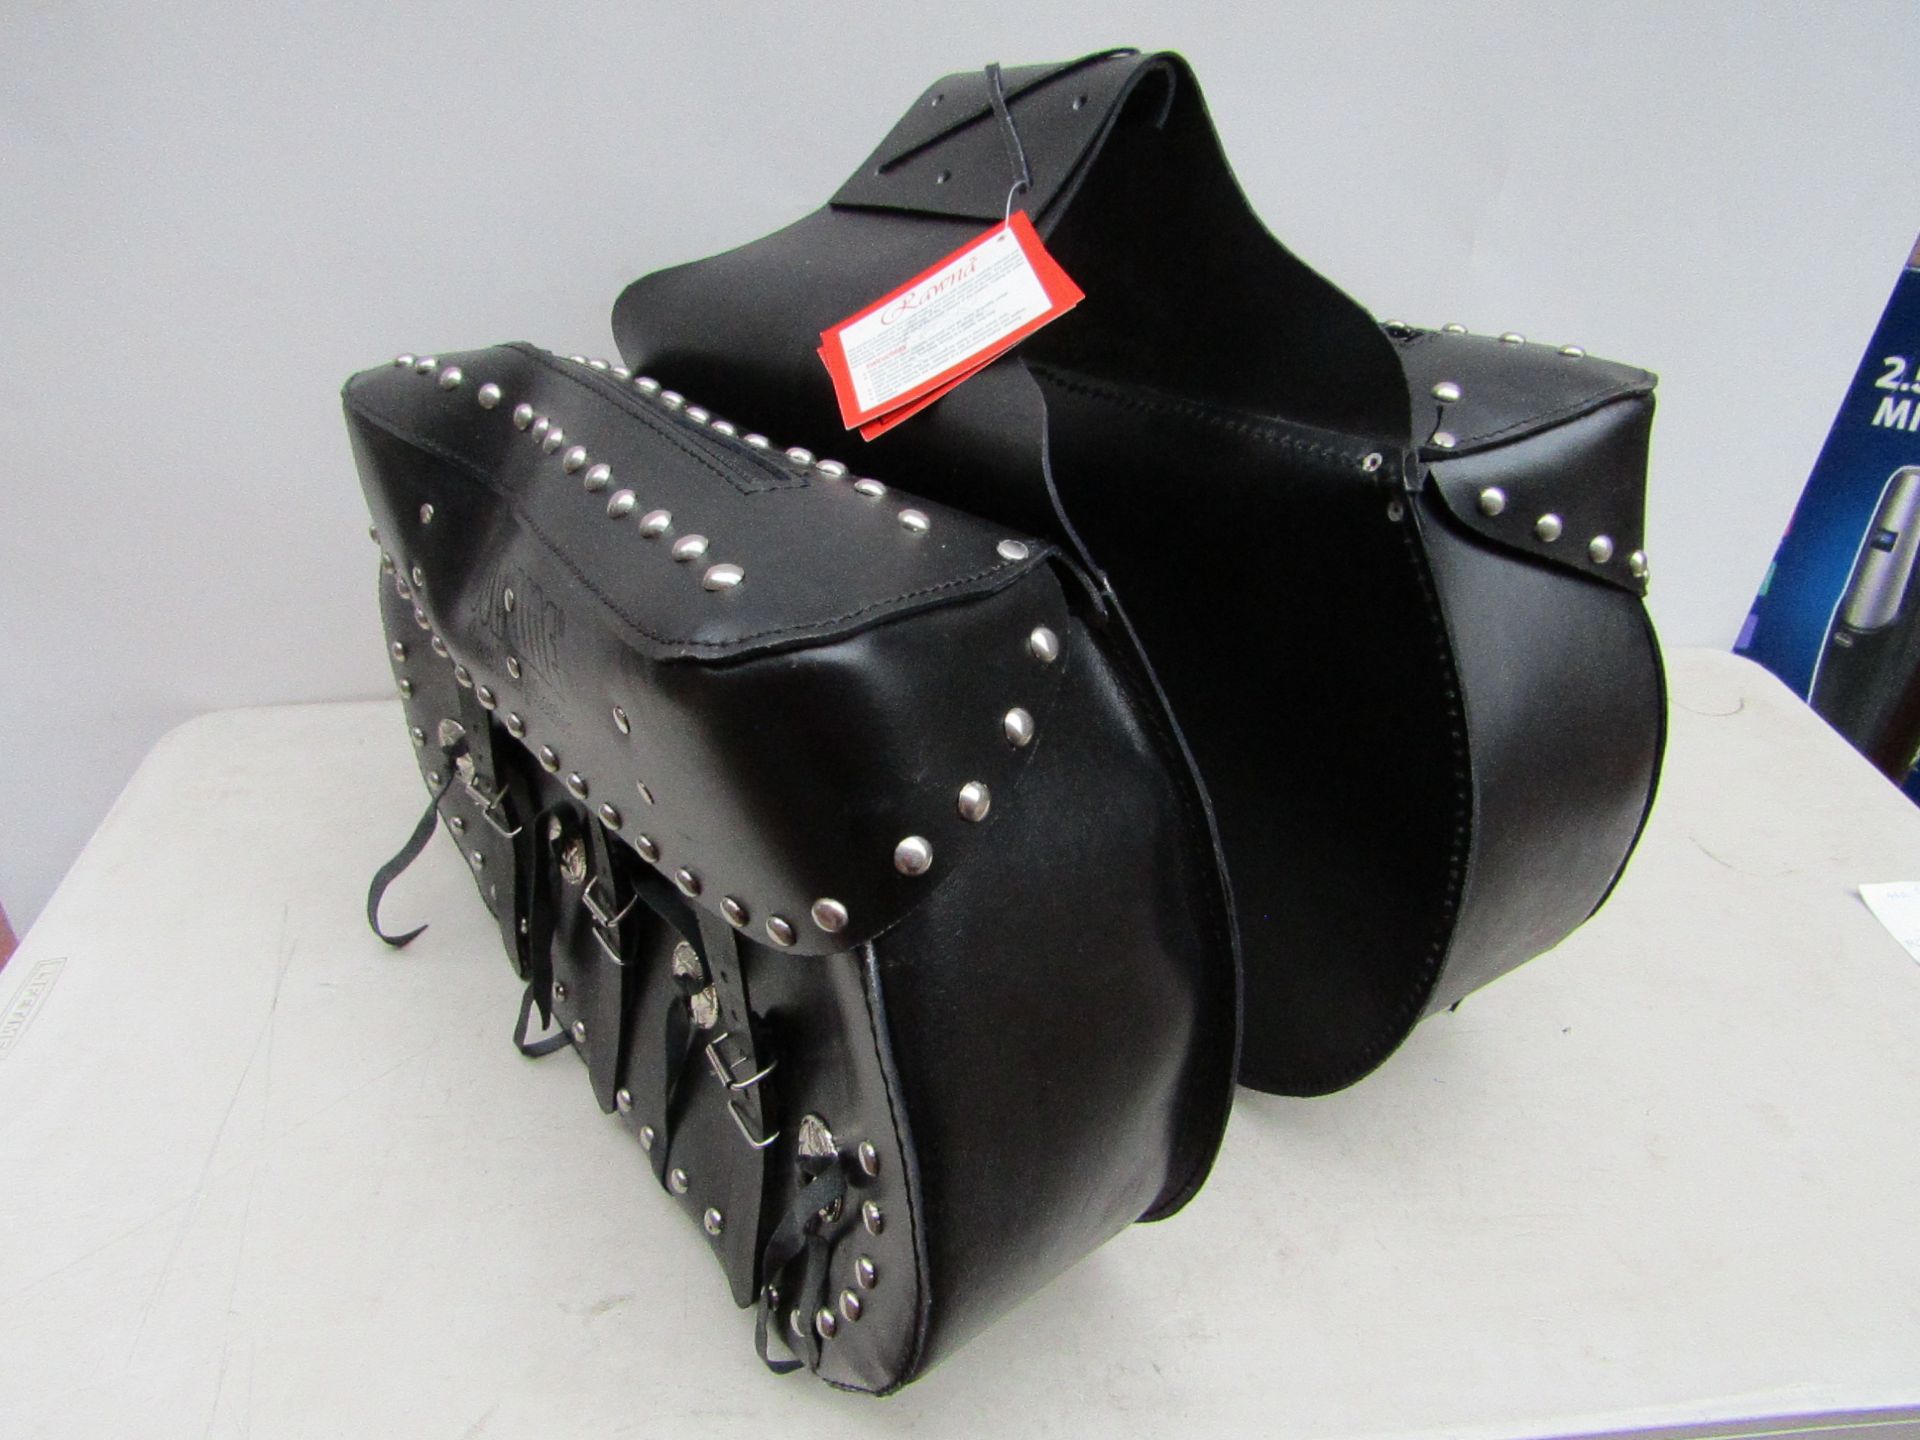 Pair (1 set) of Sublime leather motorcycle Saddle bags, These have been stored in a damp unit but